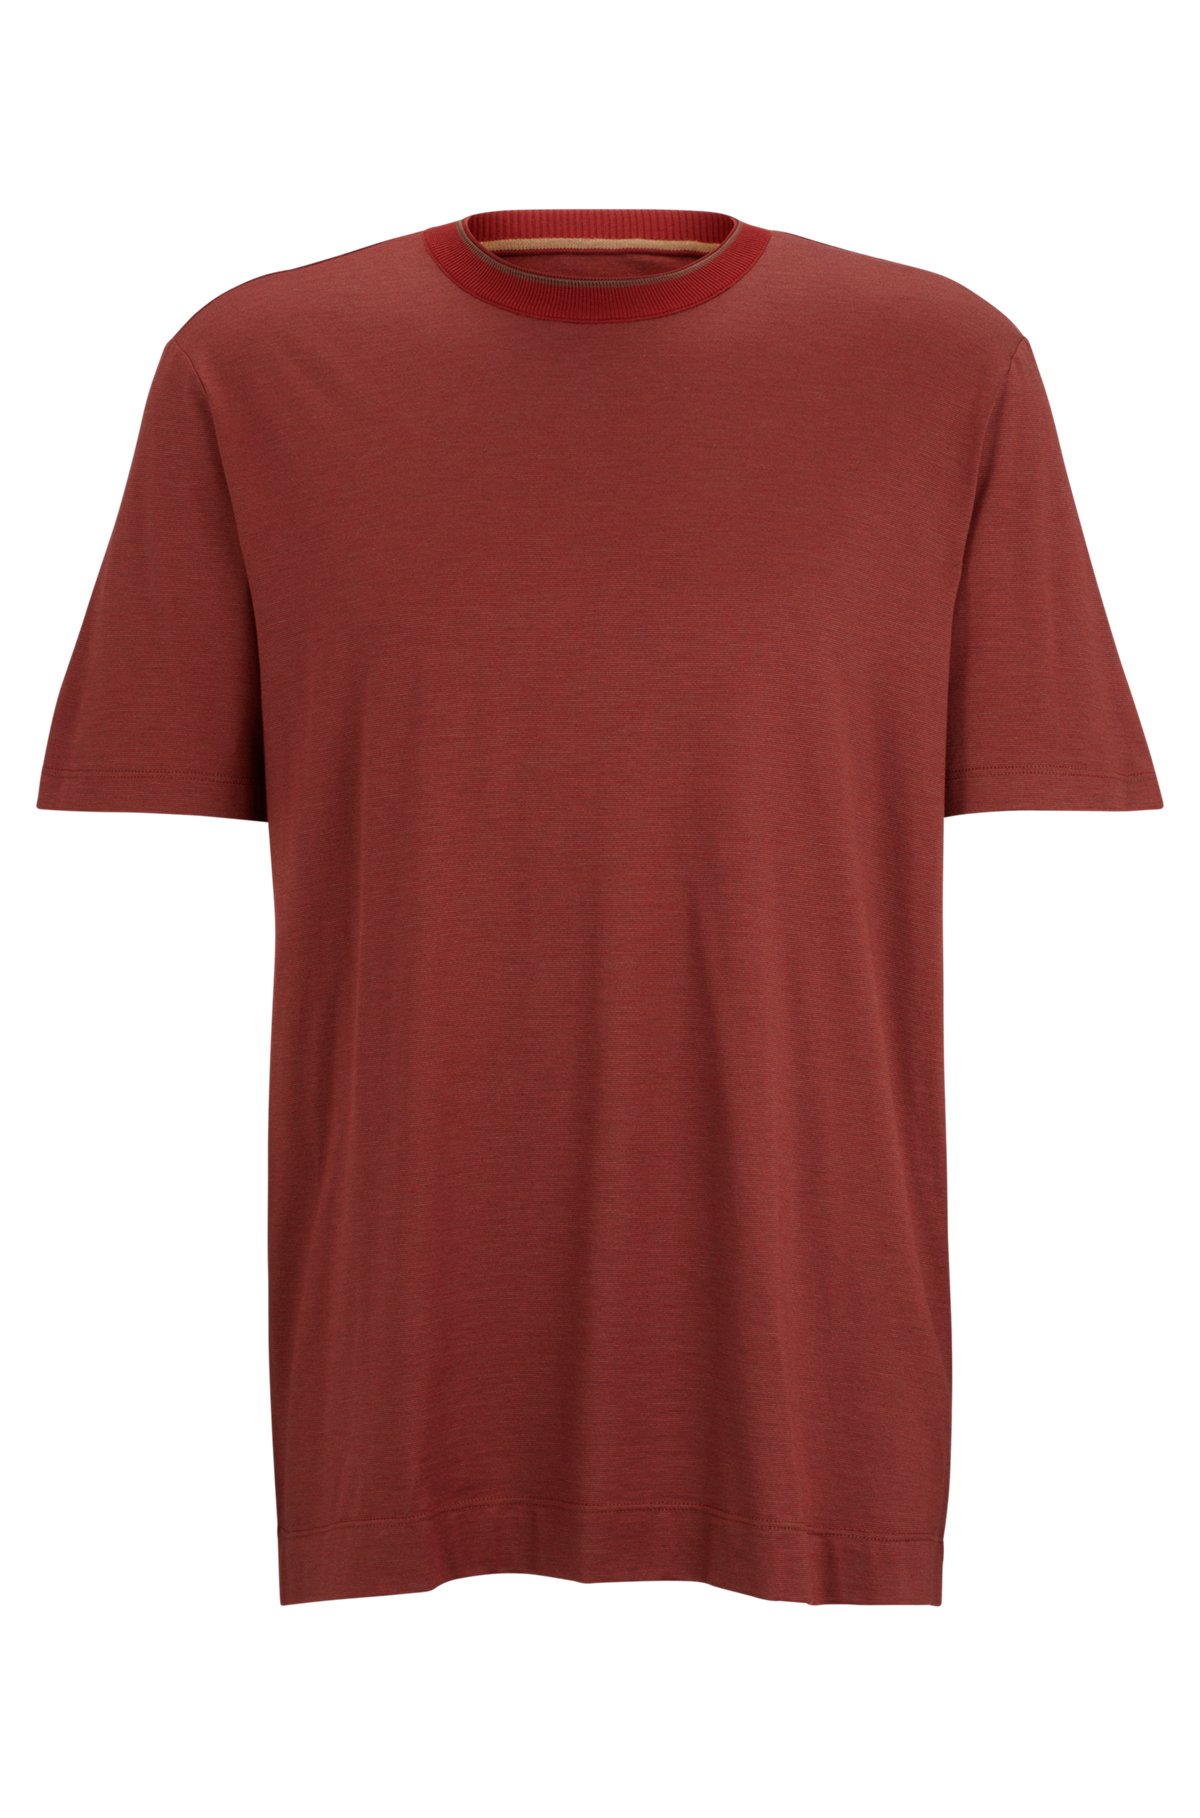 Cotton-silk T-shirt with fineline stripes and double collar, Red